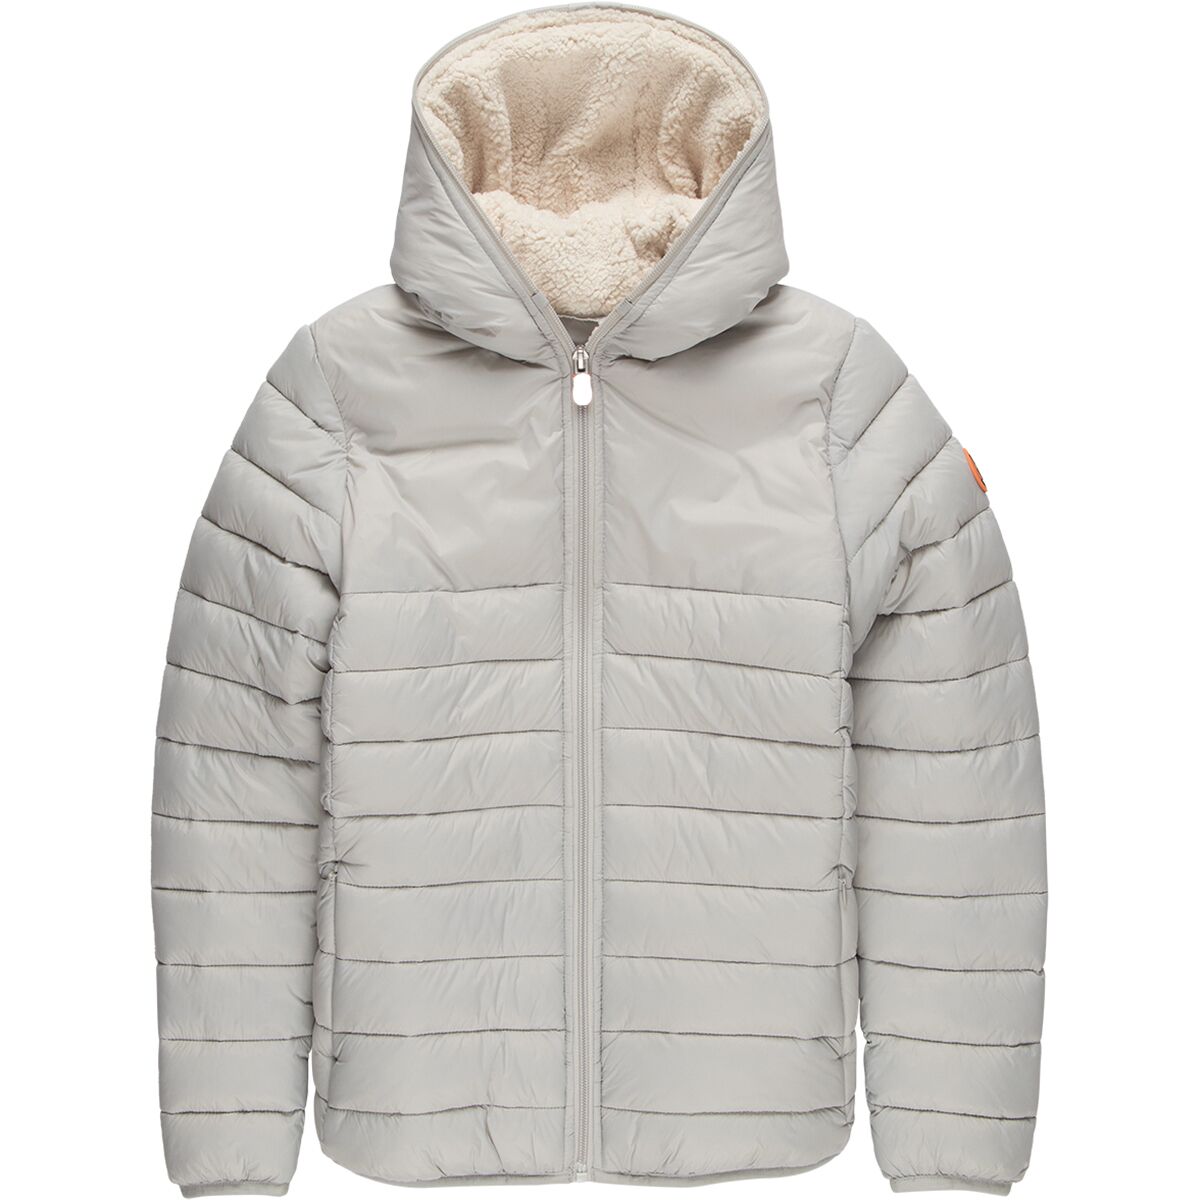 Save The Duck Cory Jacket - Girls'